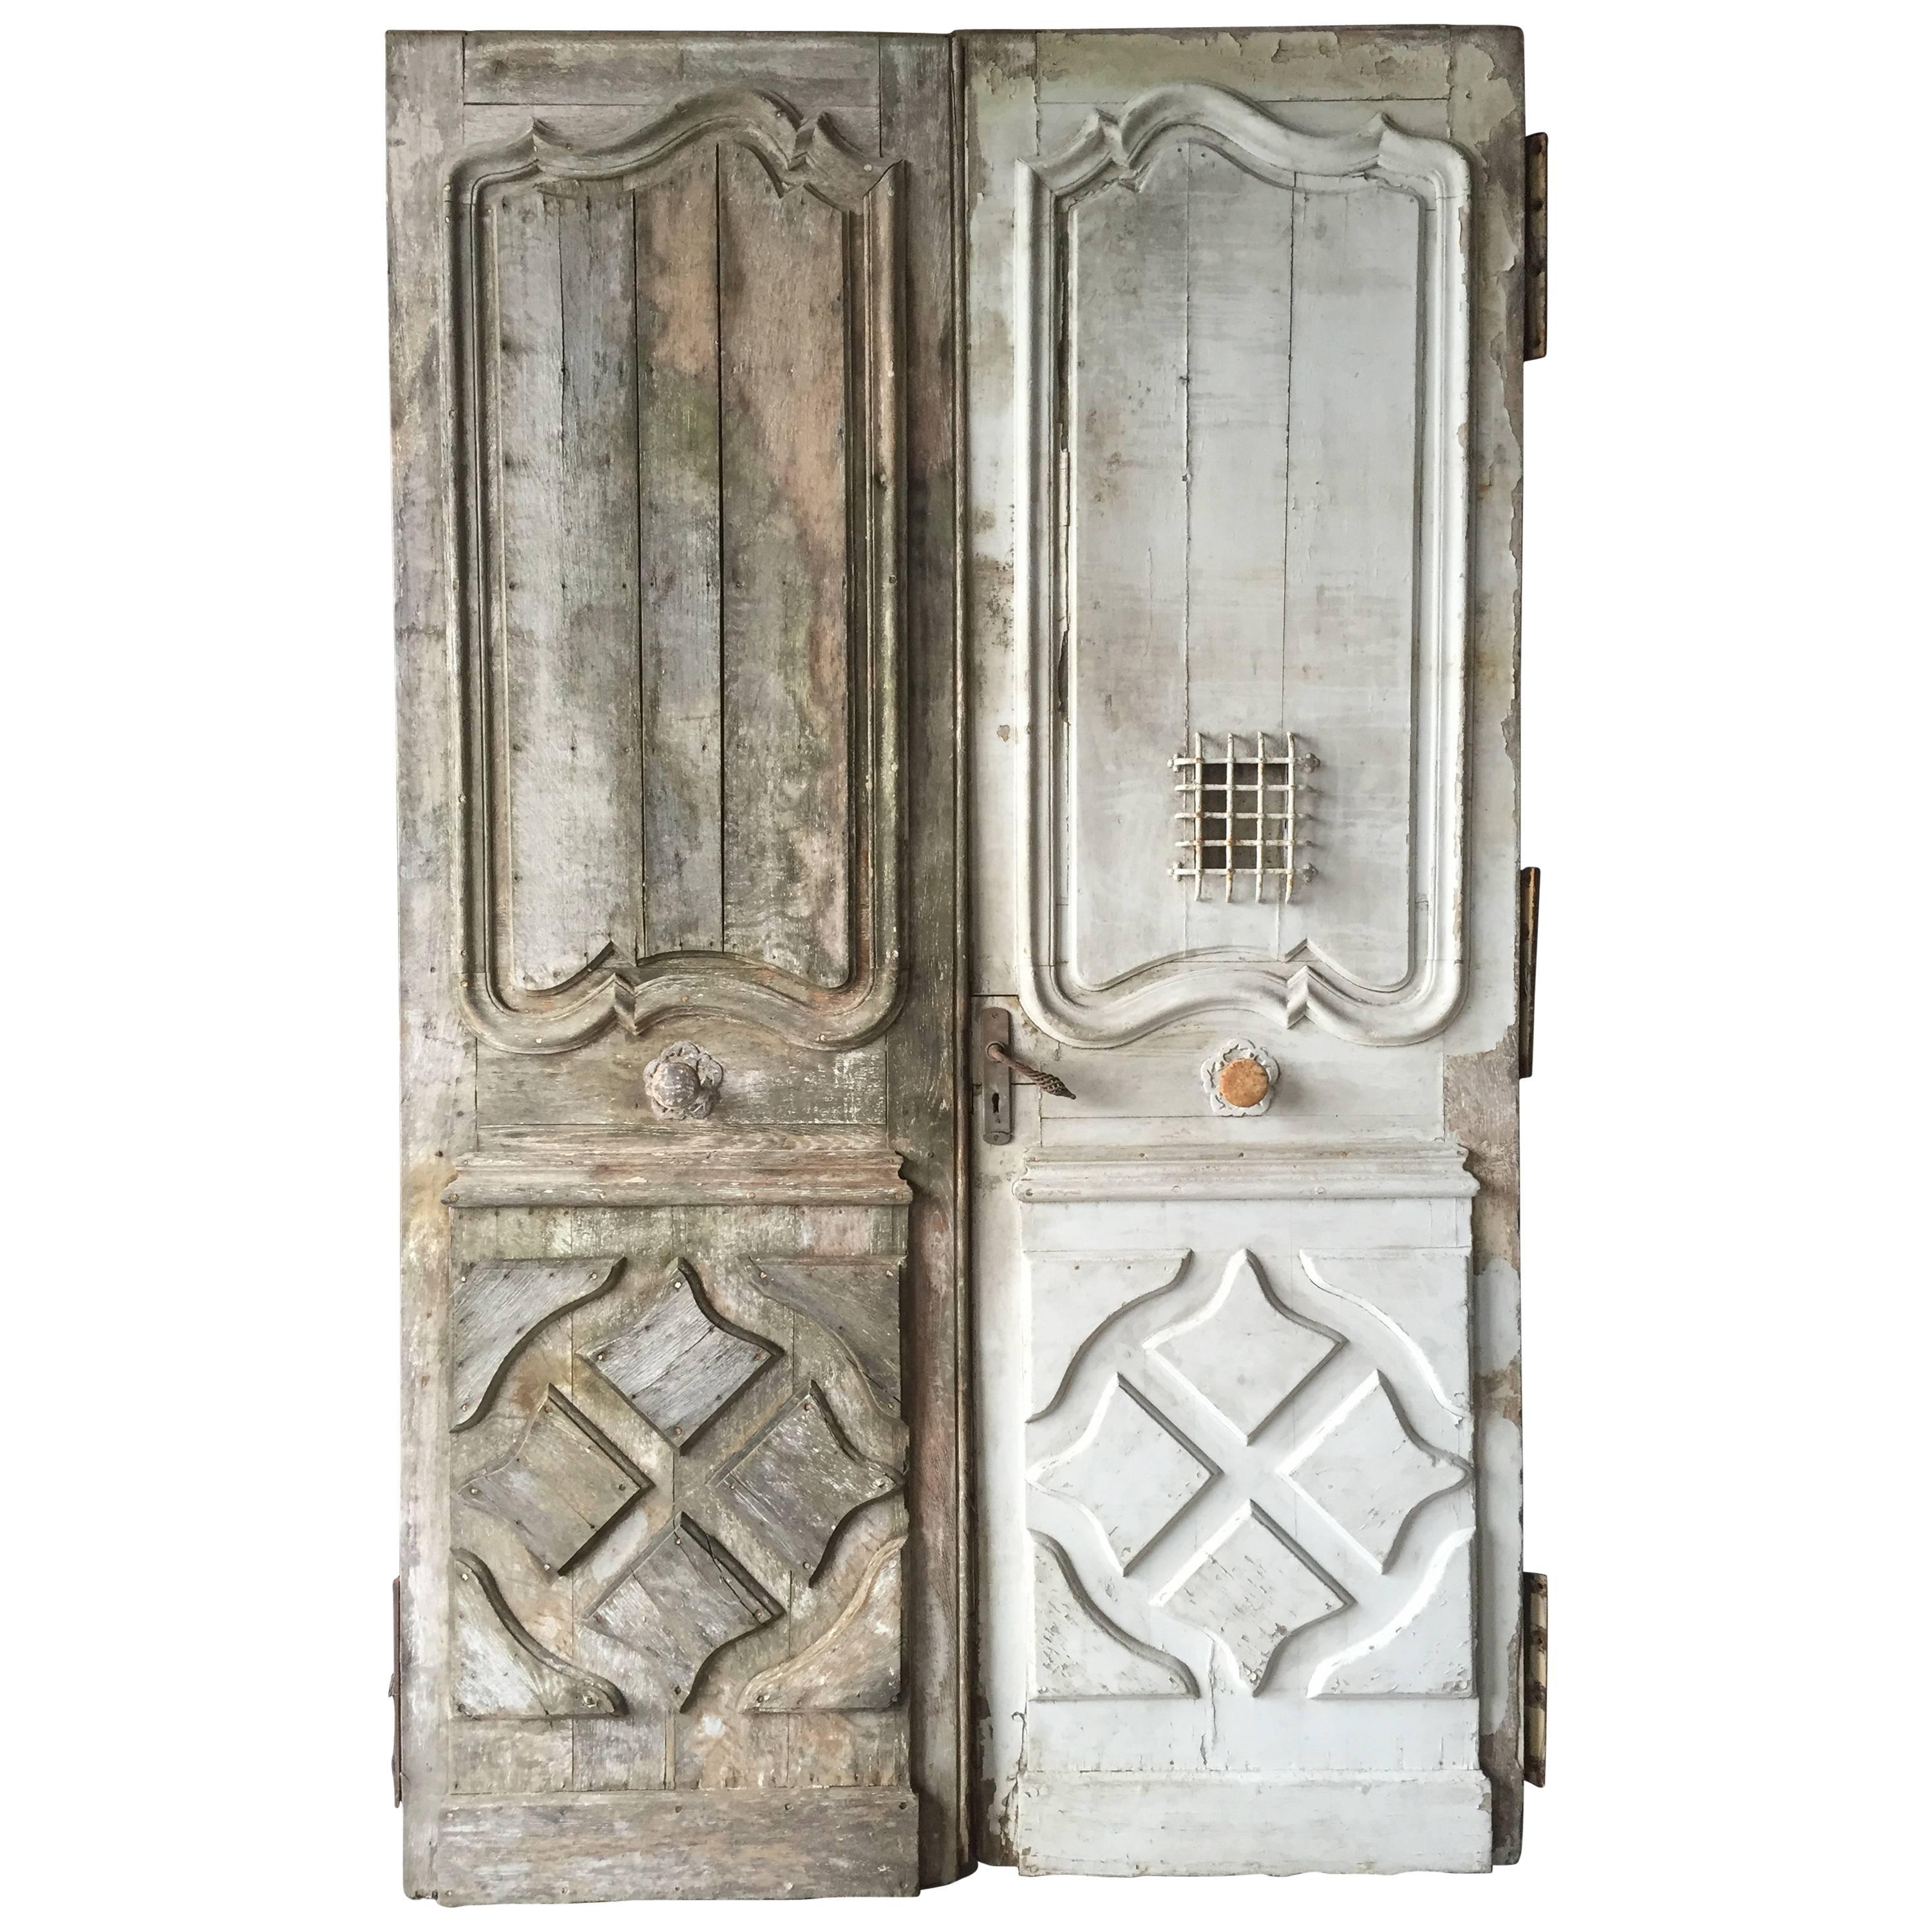 Original Chateaux Front Doors, Solid Oak Hand-Crafted, 18th Century, France